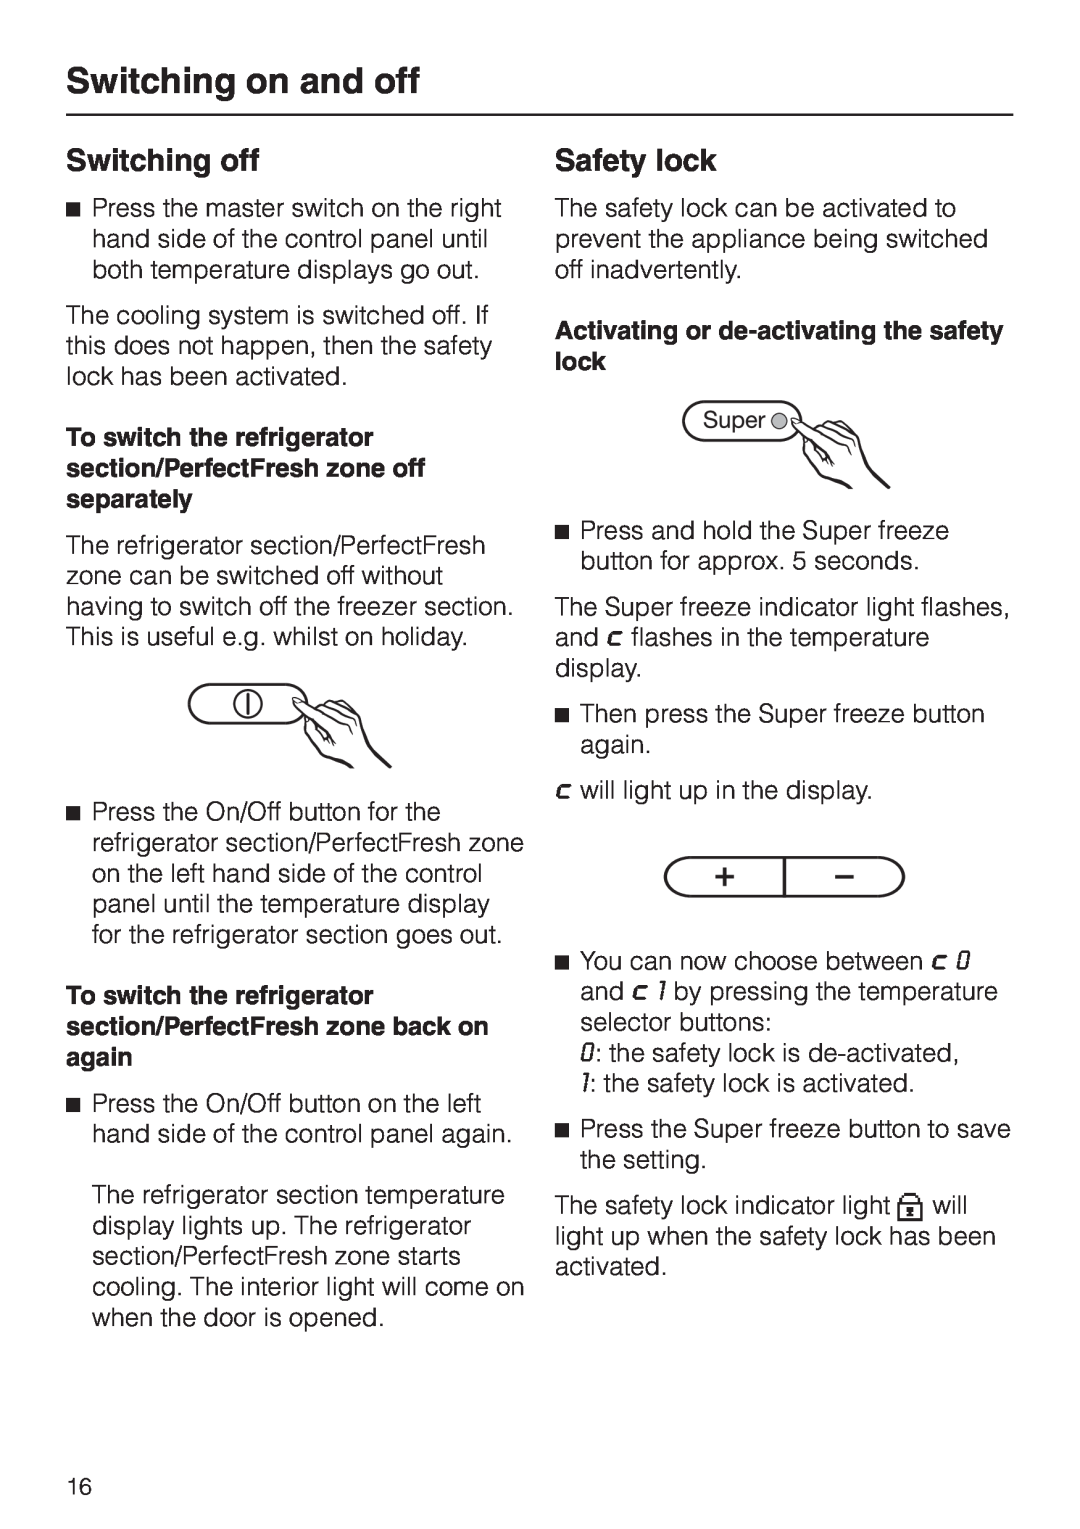 Miele KF 9757 ID installation instructions Switching off, Safety lock, Switching on and off 